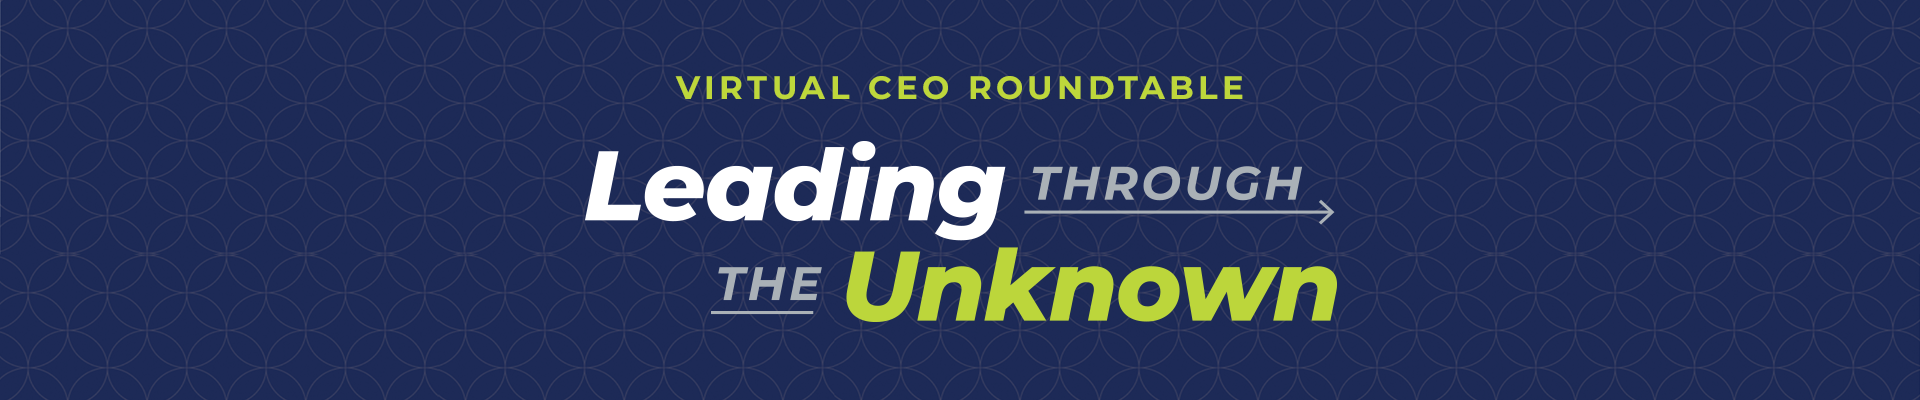 Virtual CEO Roundtable: Leading Through the Unknown